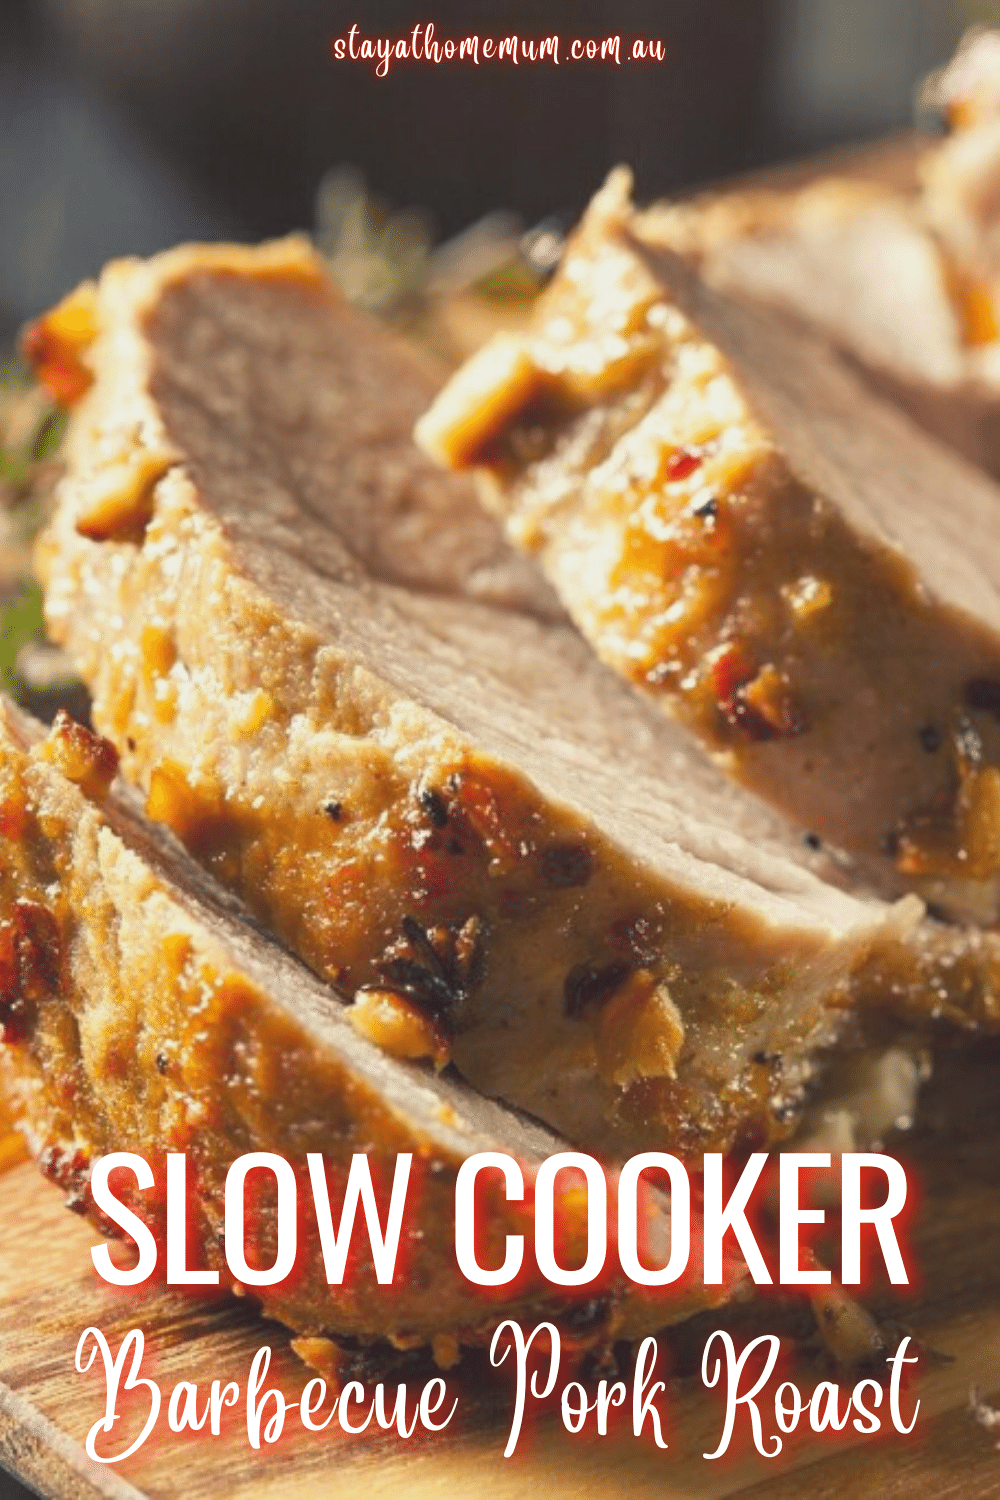 Slow Cooker Barbecue Pork Roast | Stay At Home Mum